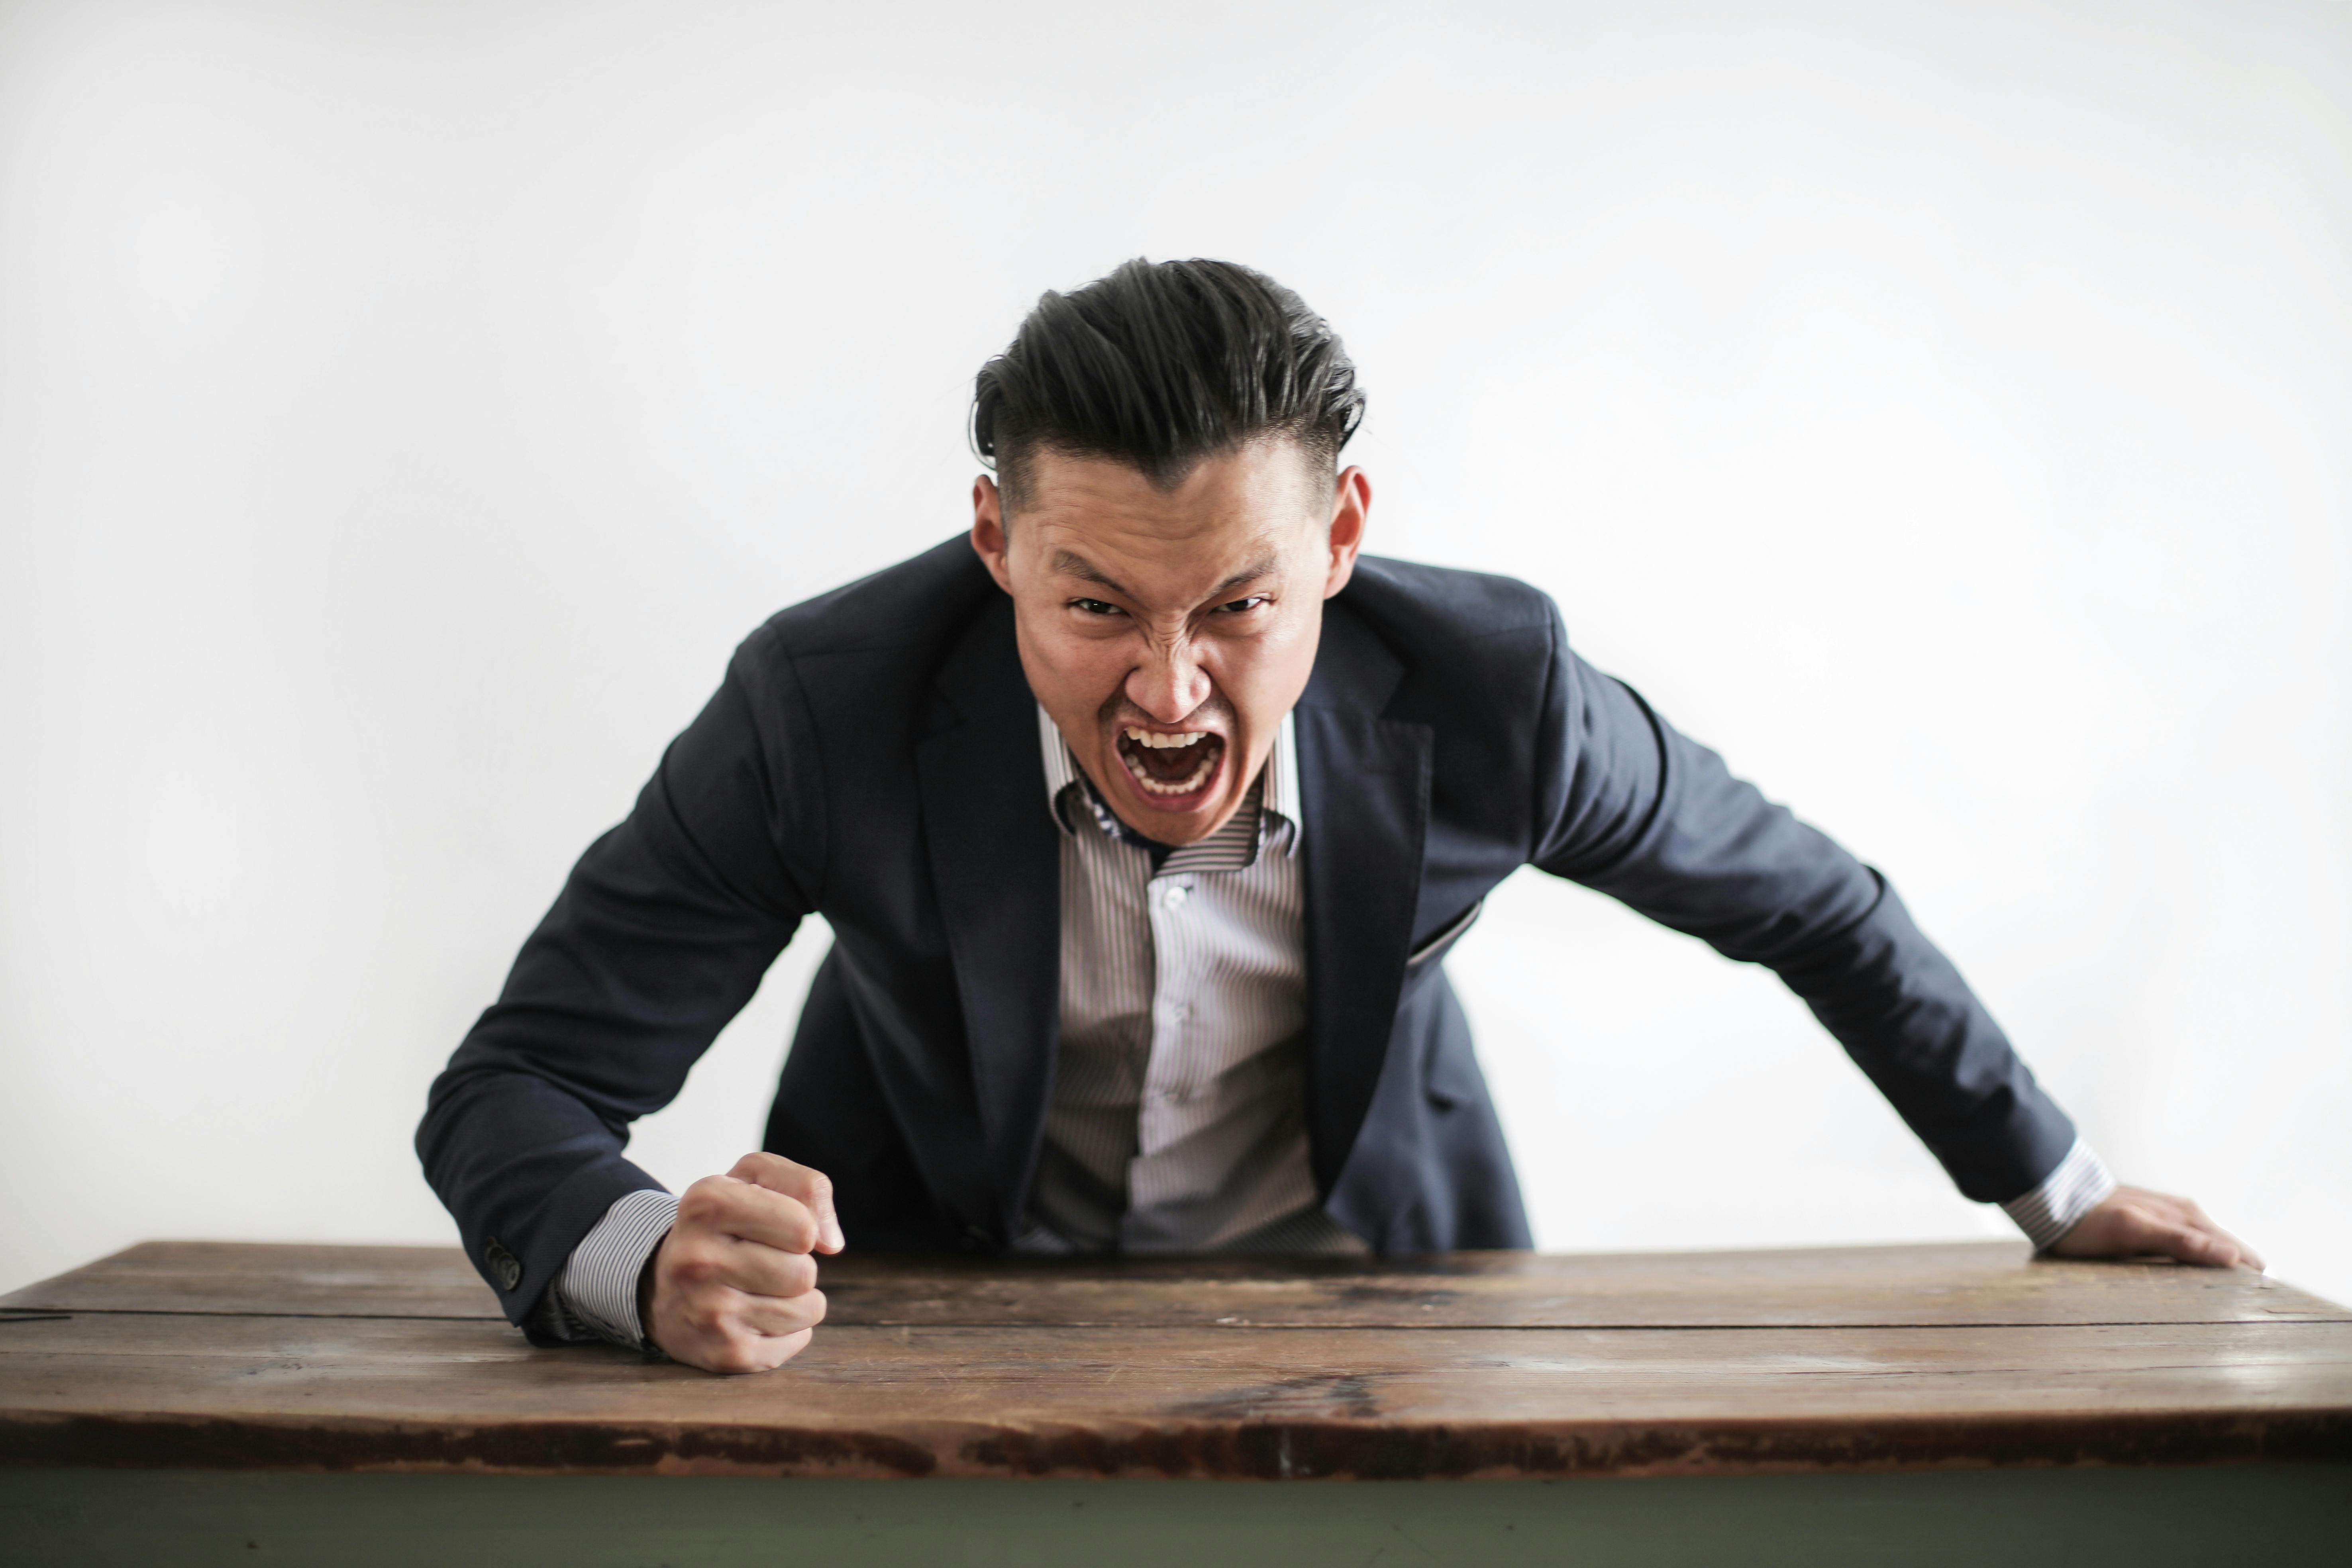 An angry man screaming over a table | Source: Pexels